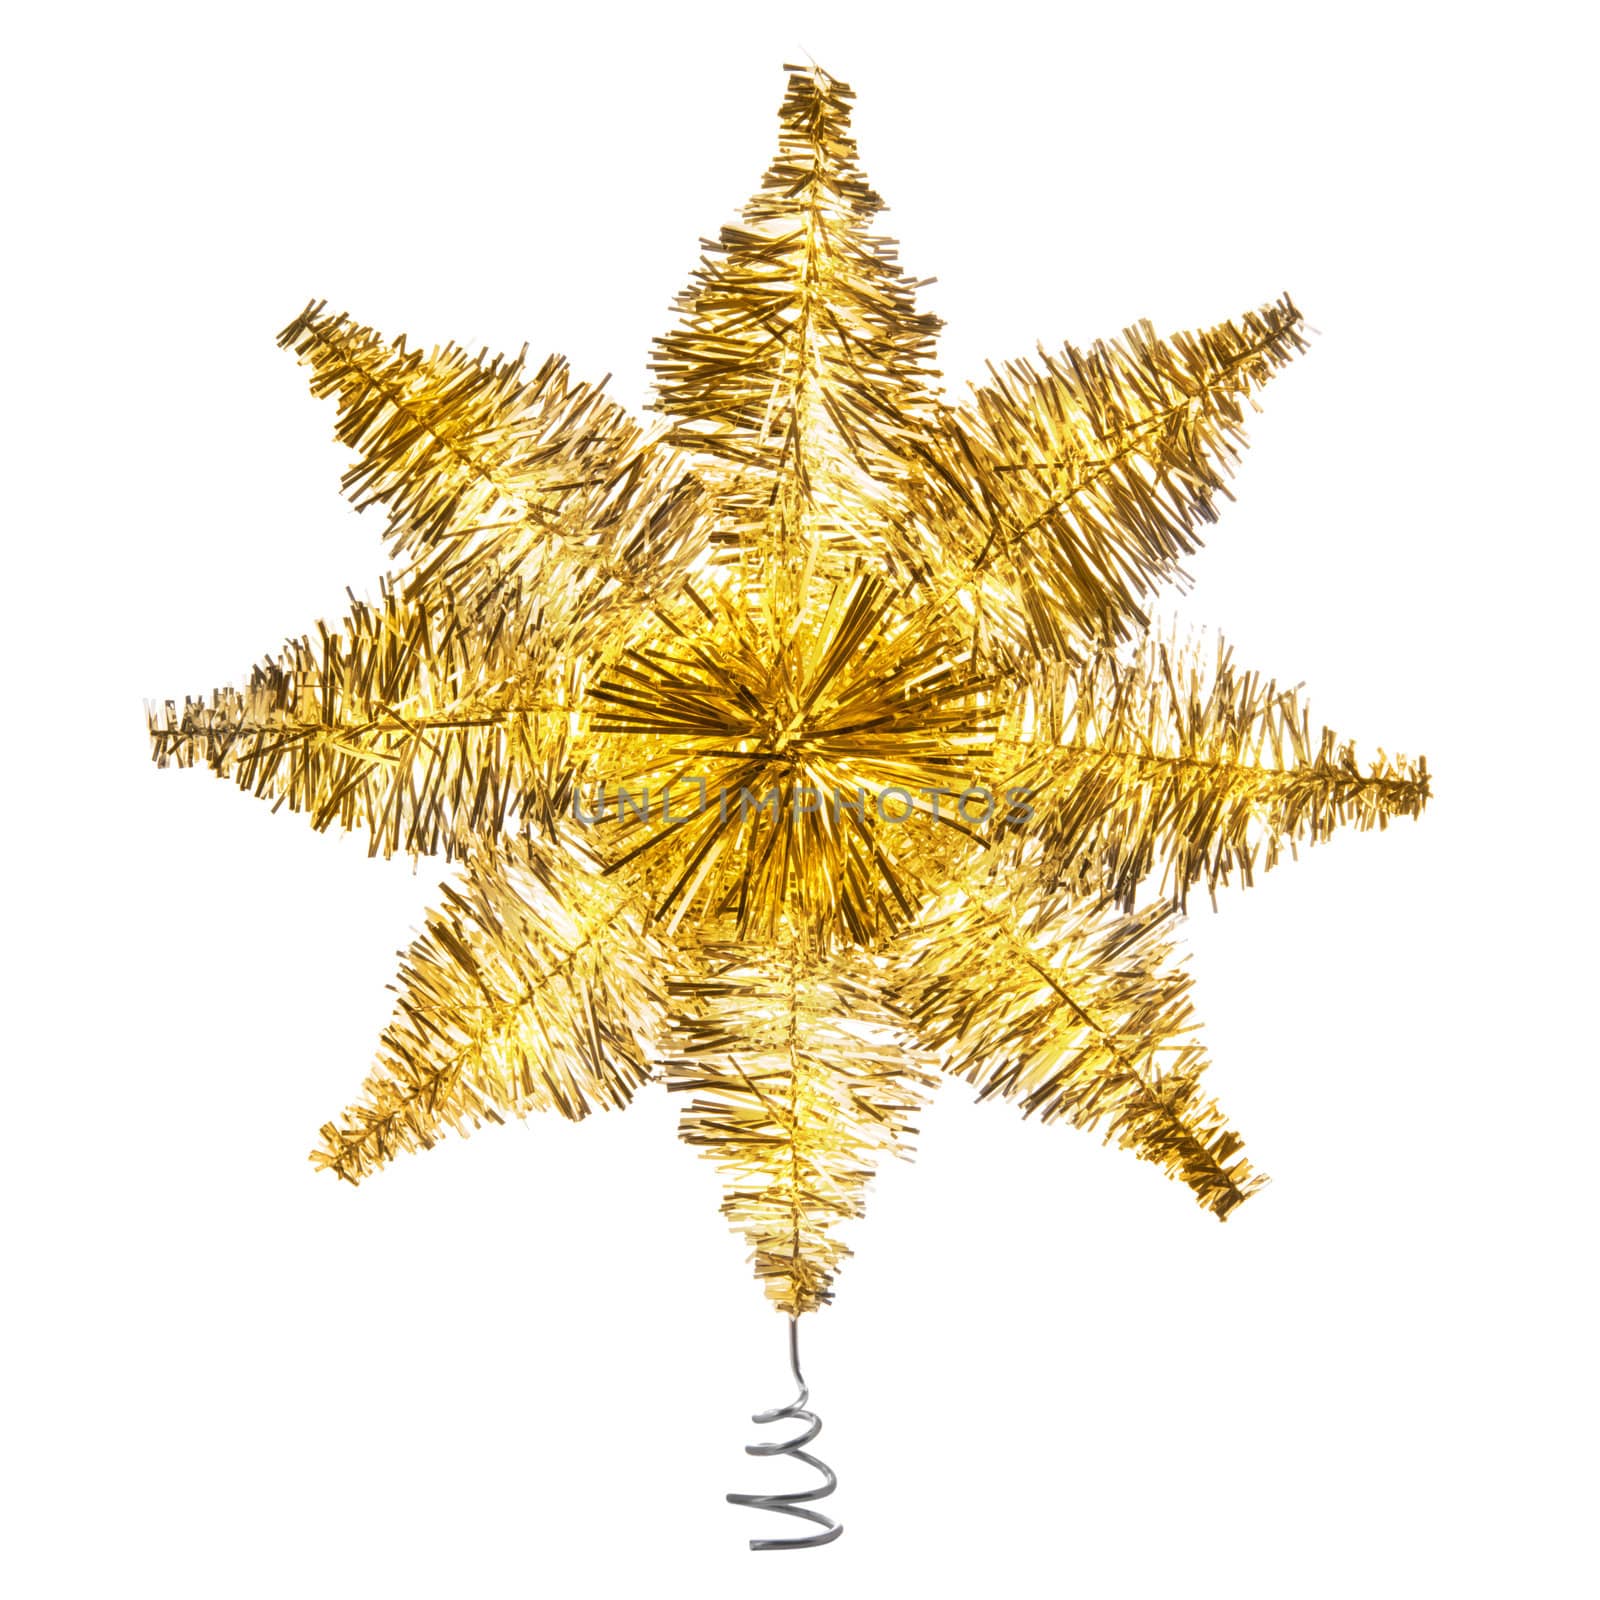 Christmas star decoration ornament isolated on white background